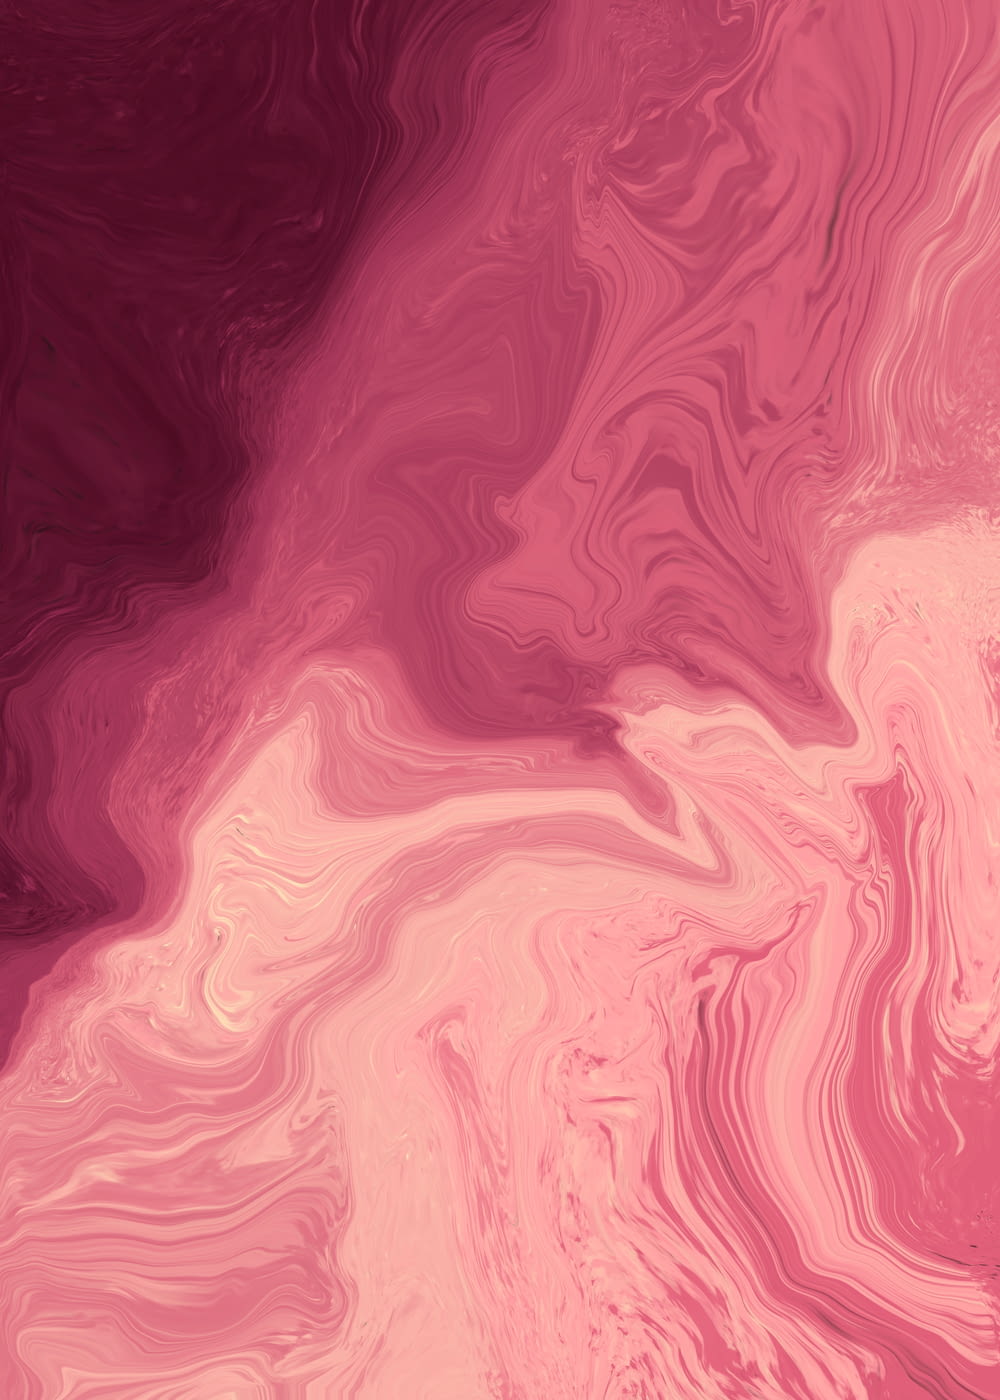 a pink and red background with a swirl pattern